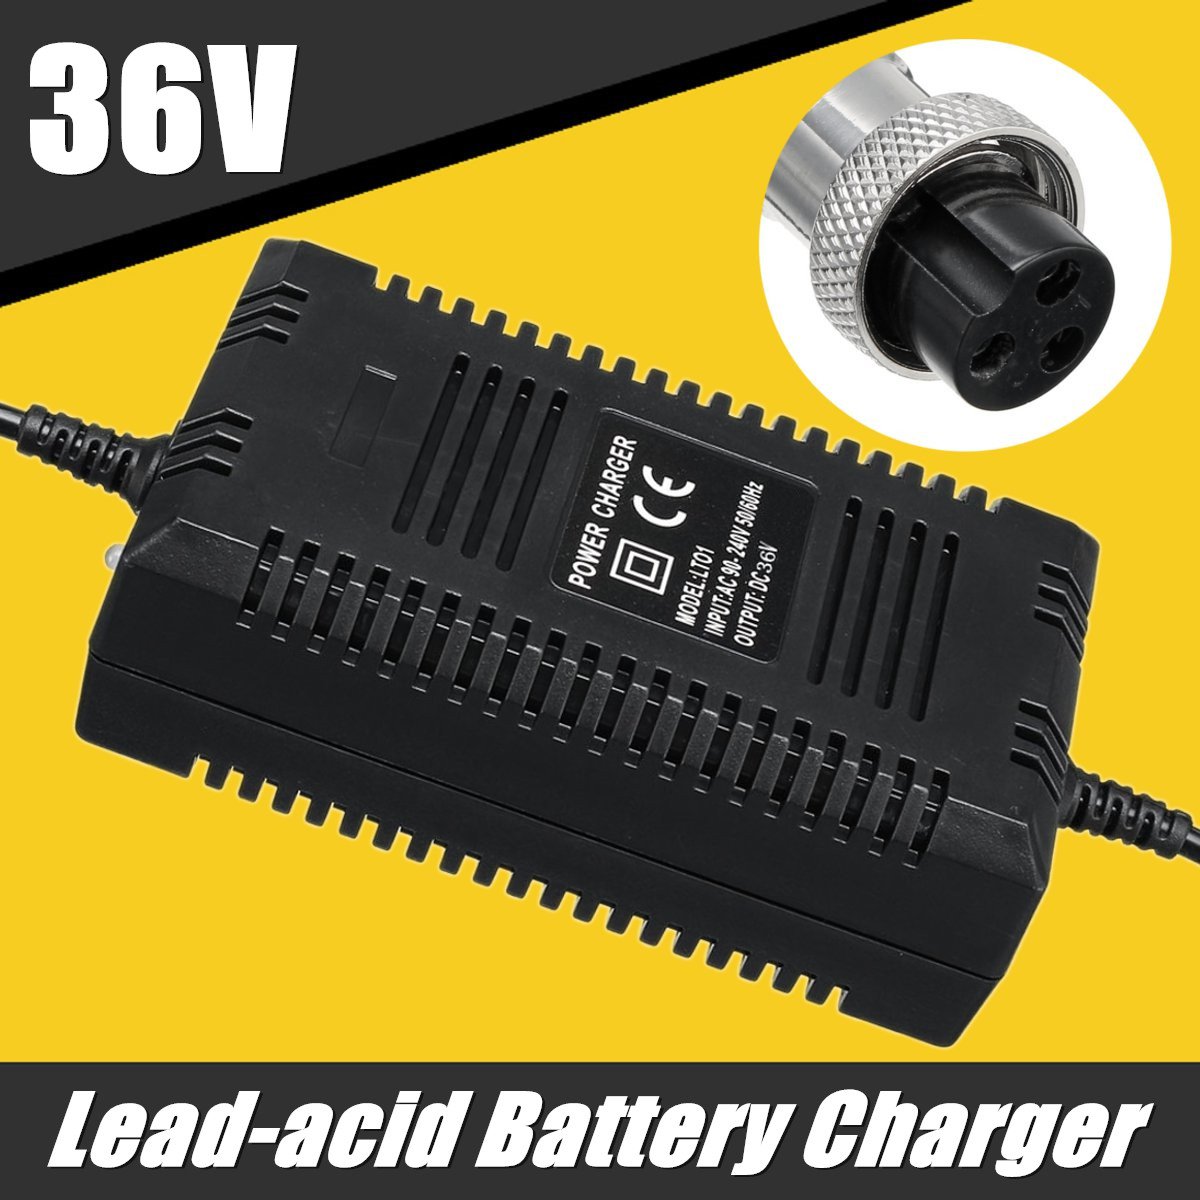 36V-18A-Lead-acid-Battery-Charger-Electric-Car-Vehicle-Scooter-Bicycle-Charger-1375553-3